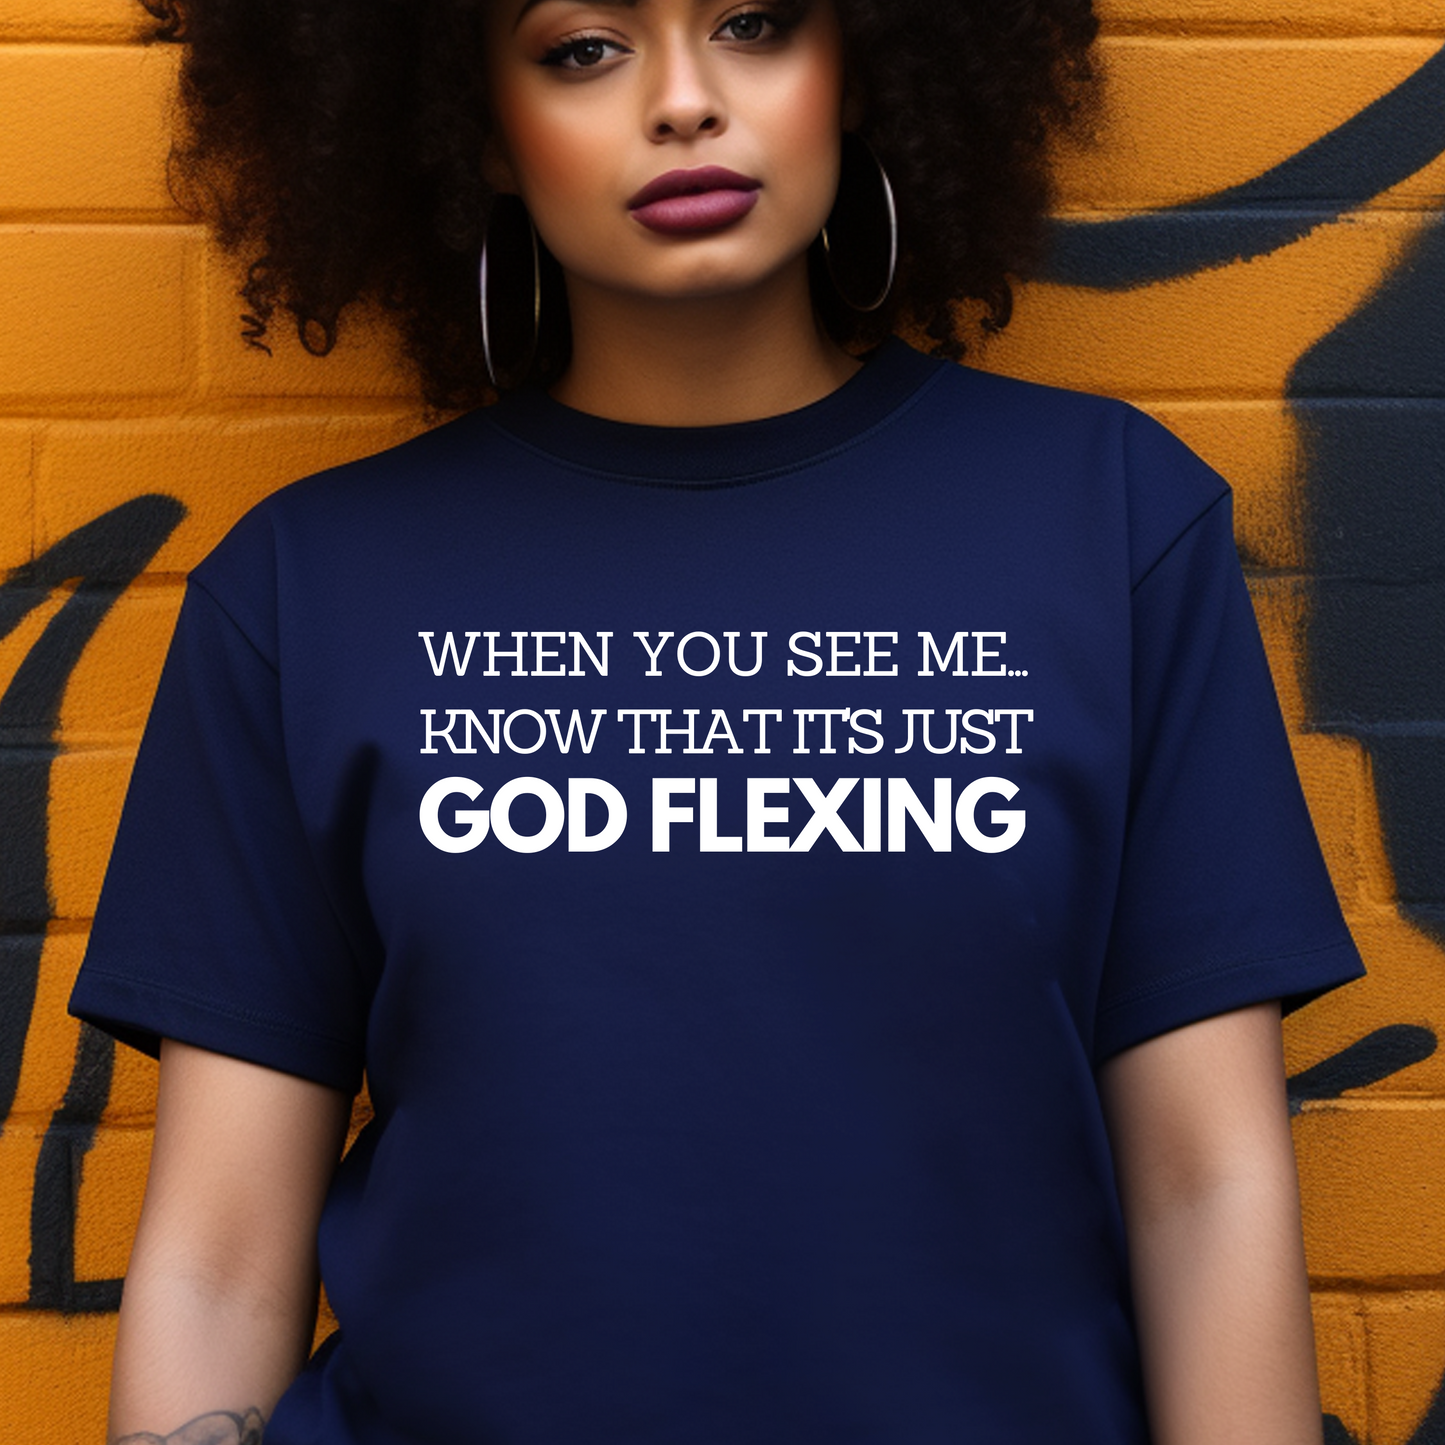 Elegant navy 'When You See Me Know That it's just God Flexing' T-shirt from Triumph Tees. This faith-themed apparel is a fashionable way to display your belief and devotion to God.